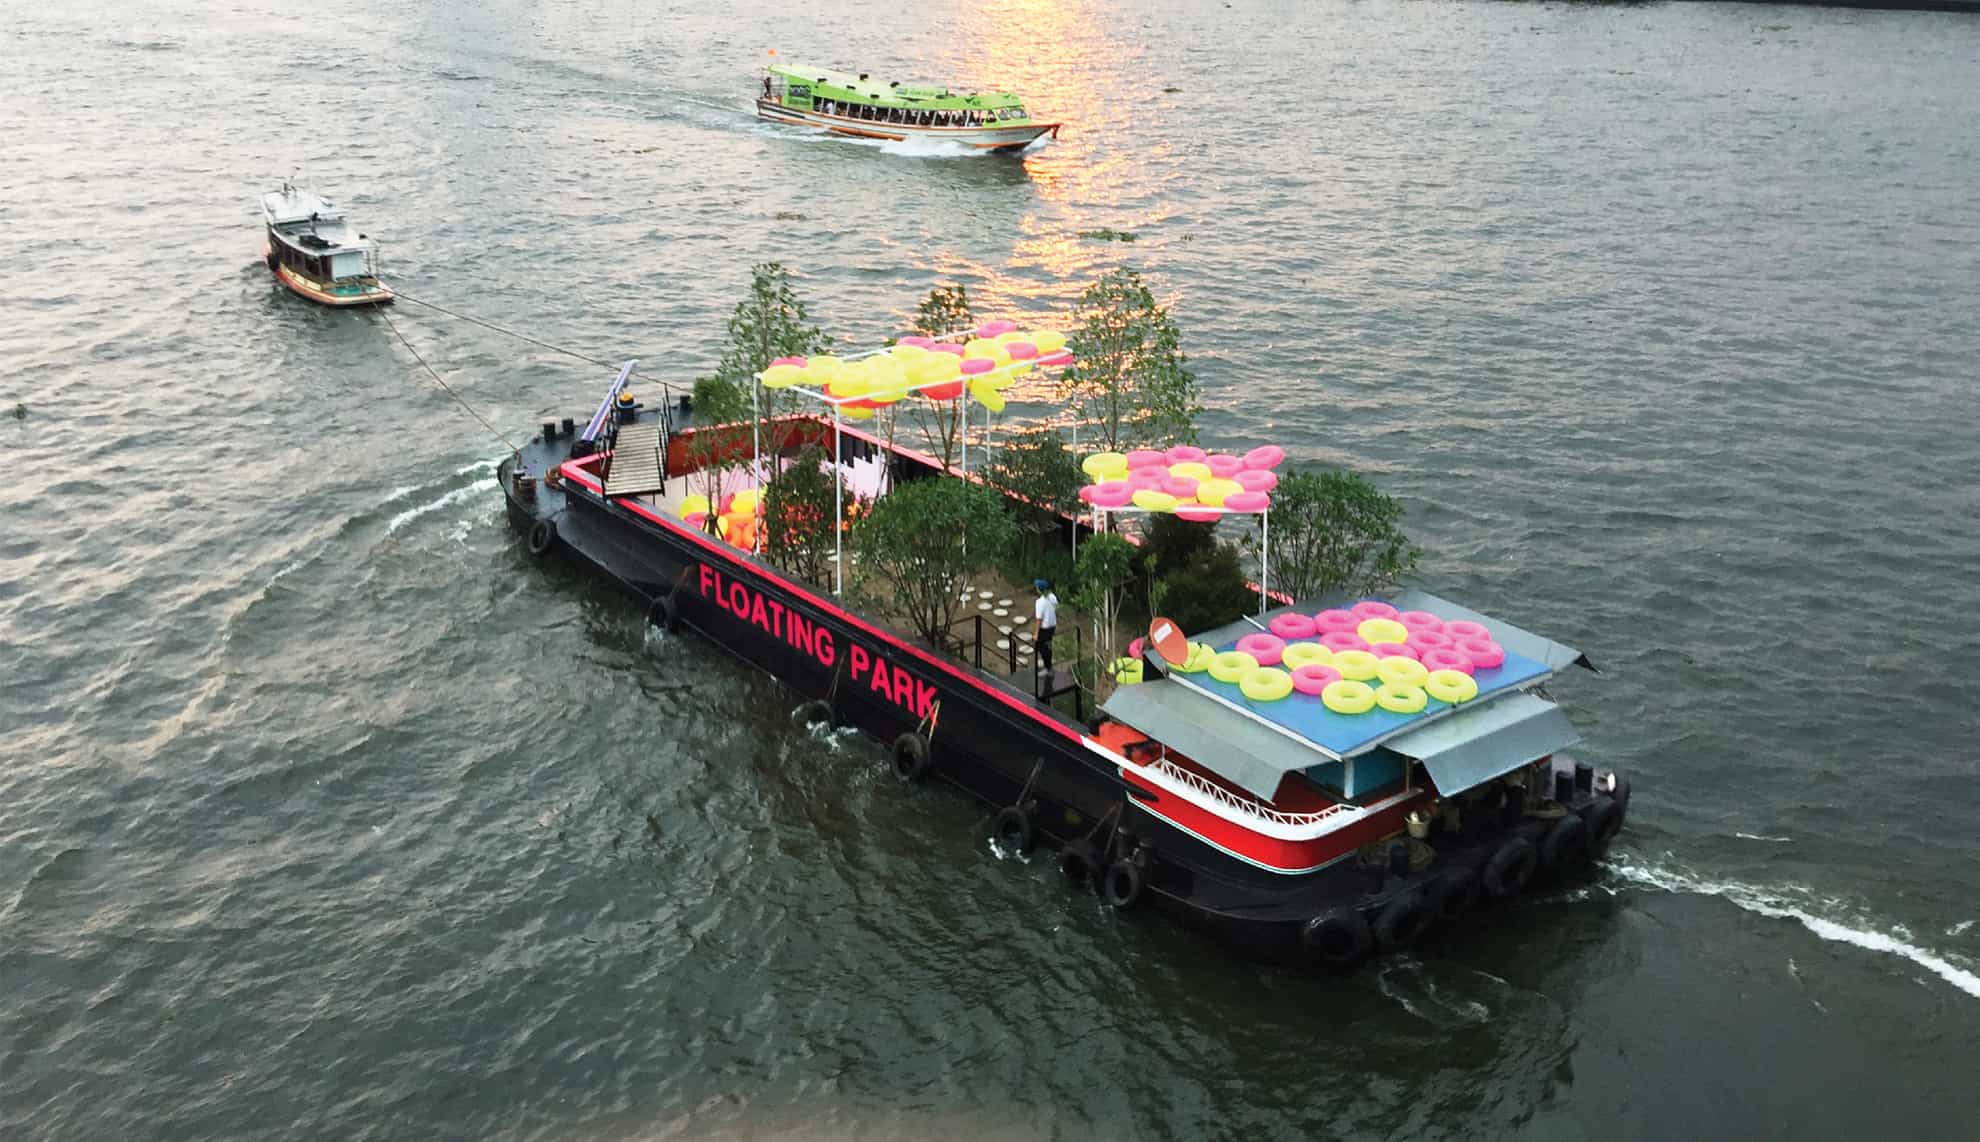 Read more about the article Floating Park